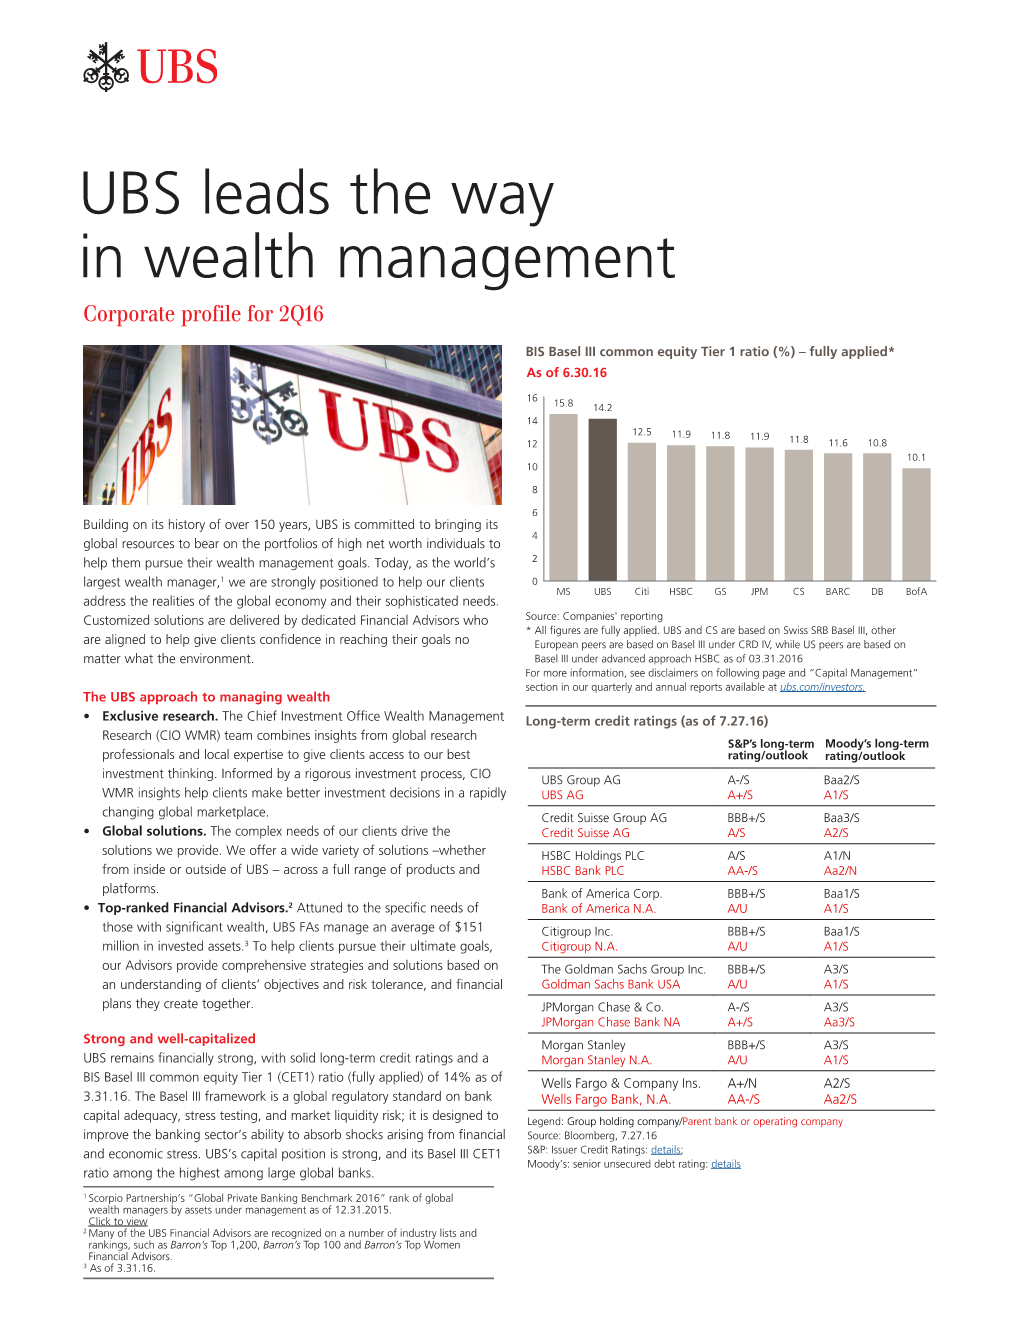 UBS Leads the Way in Wealth Management Corporate Profile for 2Q16